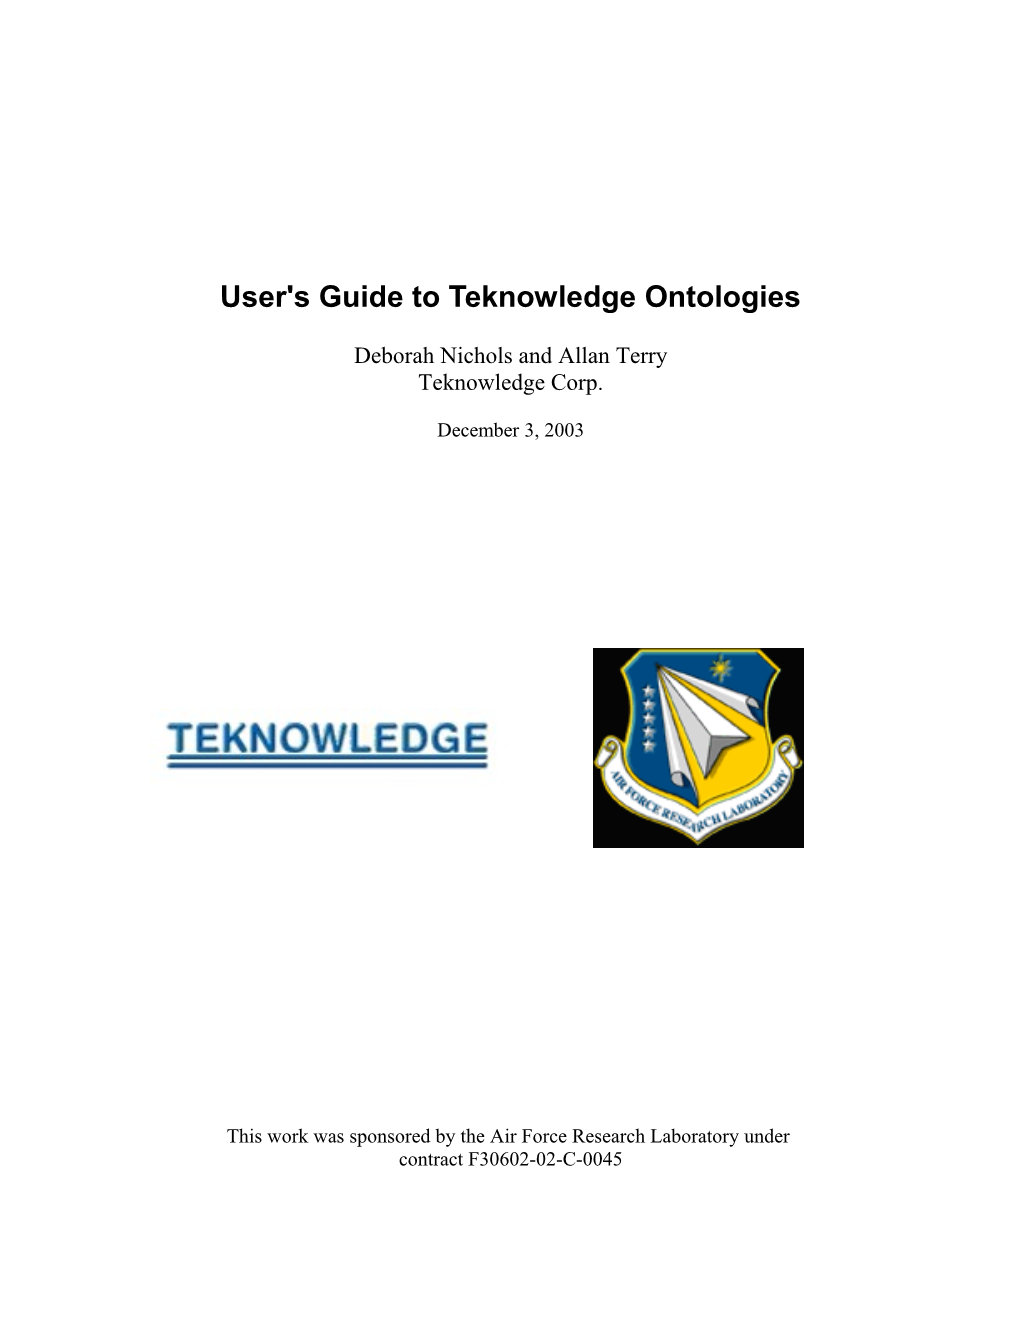 User Guide to Teknowledge Ontologies